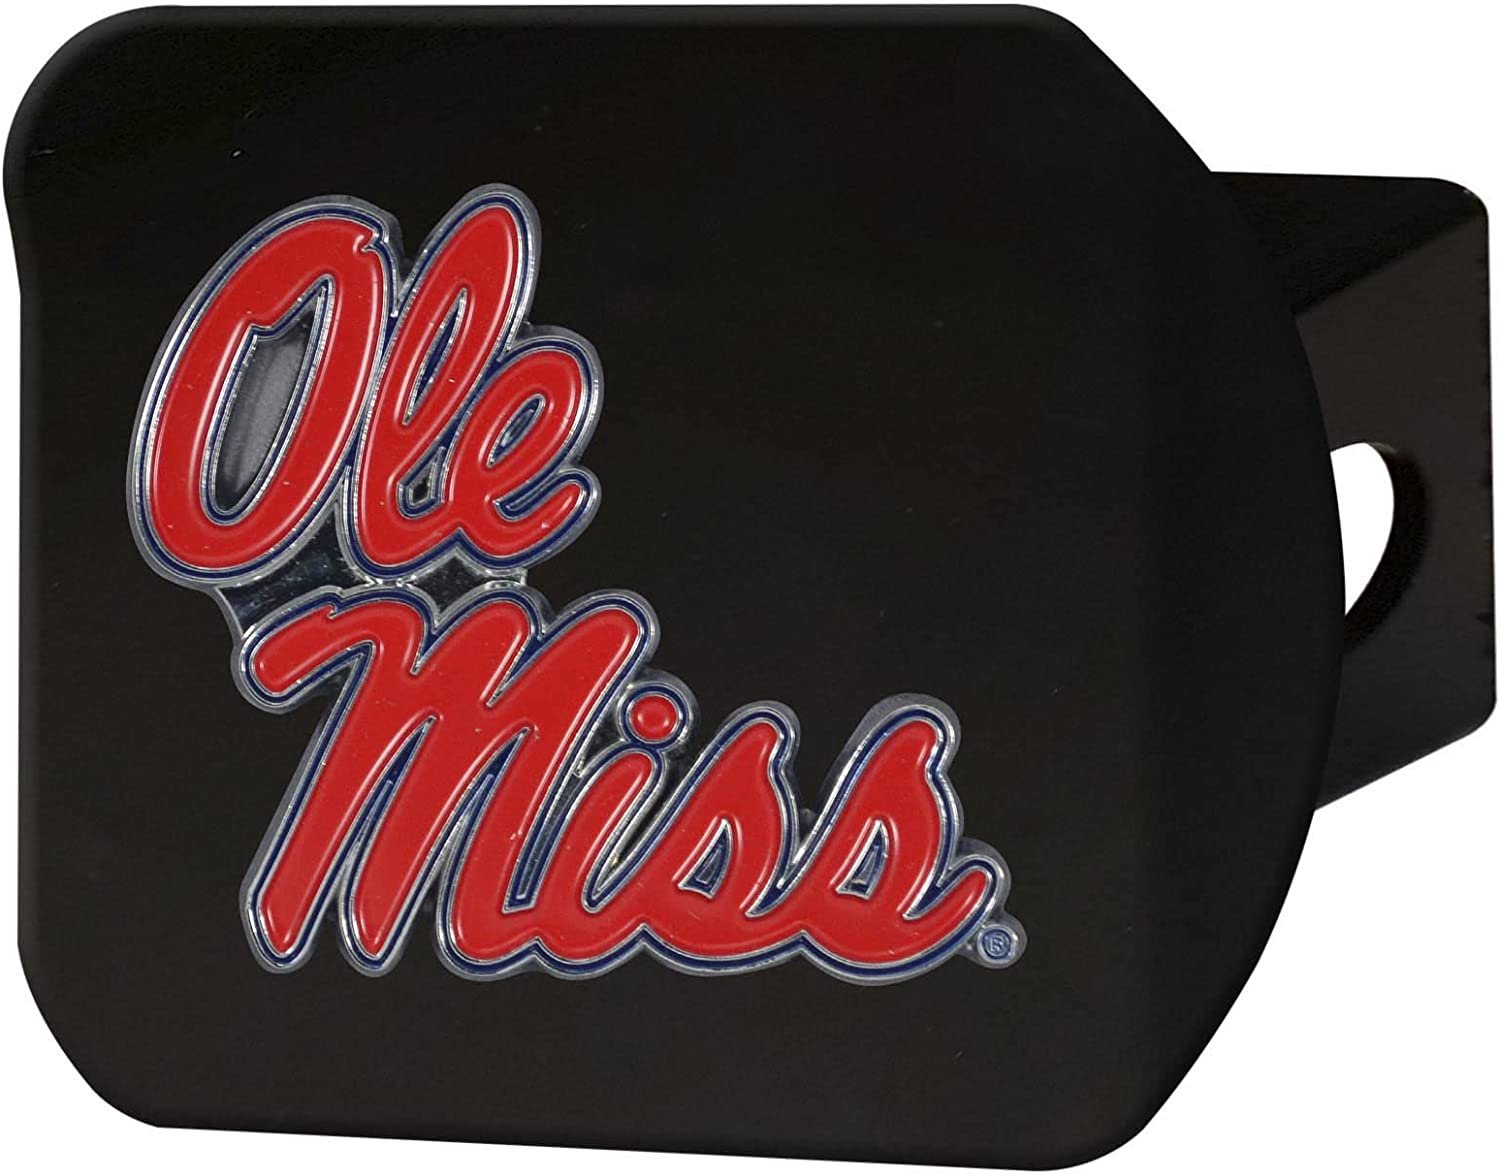 University of Mississippi Ole Miss Rebels Solid Metal Black Hitch Cover with Color Metal Emblem 2 Inch Square Type III